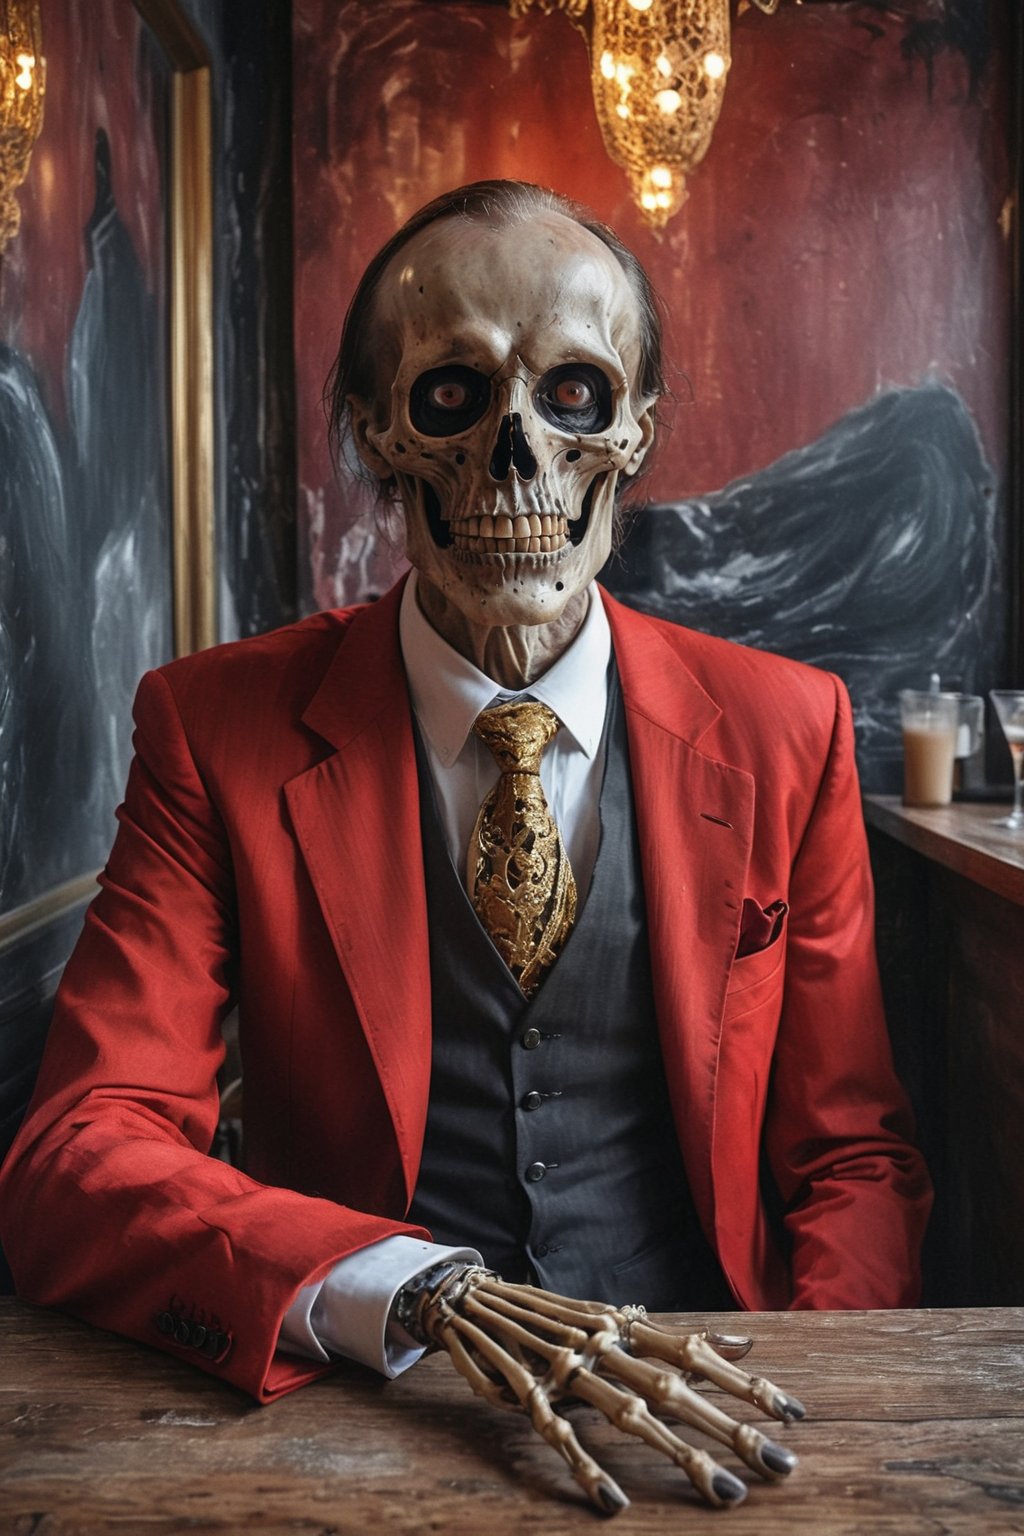  Death, the grim reaper as a creepy business man in red luxurious suit, skeleton face, black hole eyes, gold embroidered tie, sitting in a small fancy cafe in a European city,  portrait, half body portrait, holding out his hand to shake, eerie, cinematic, moody lights,style of Edvard Munch